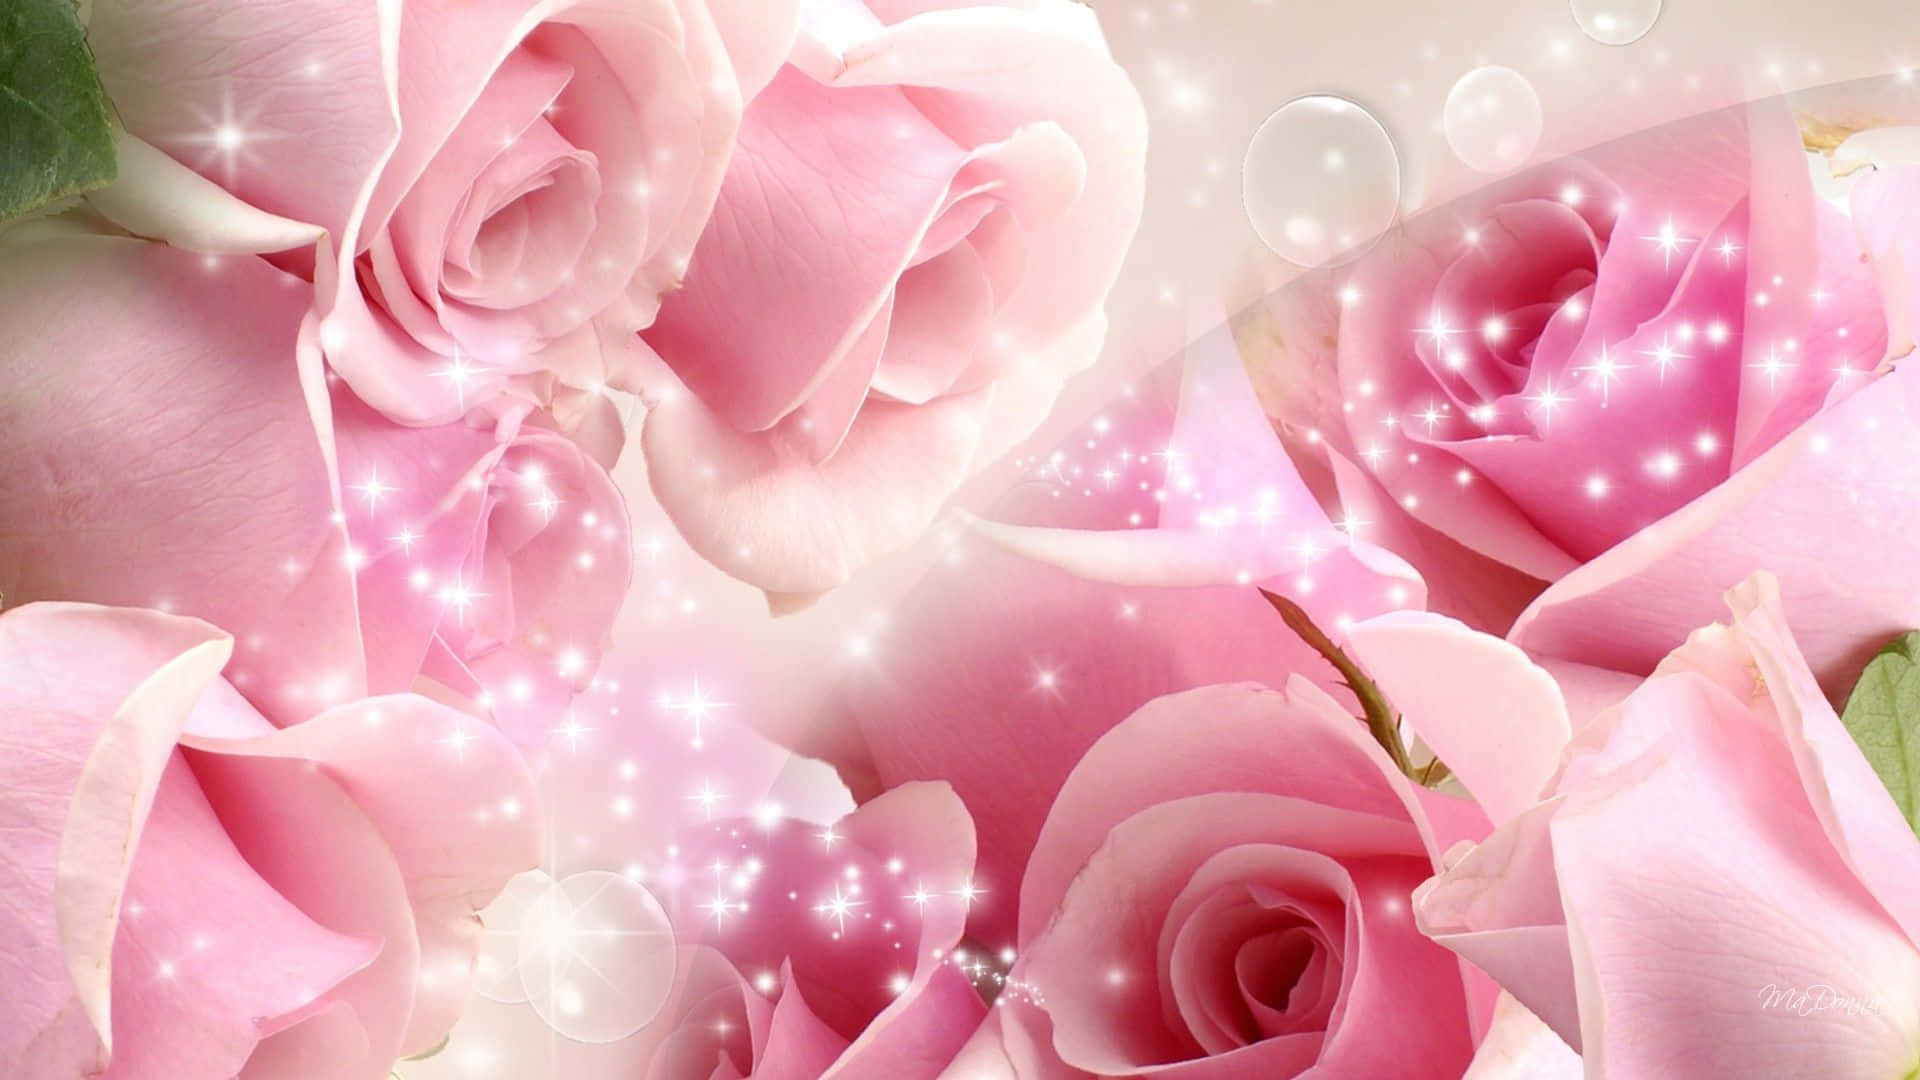 Download Pink Roses With Stars And Bubbles | Wallpapers.com